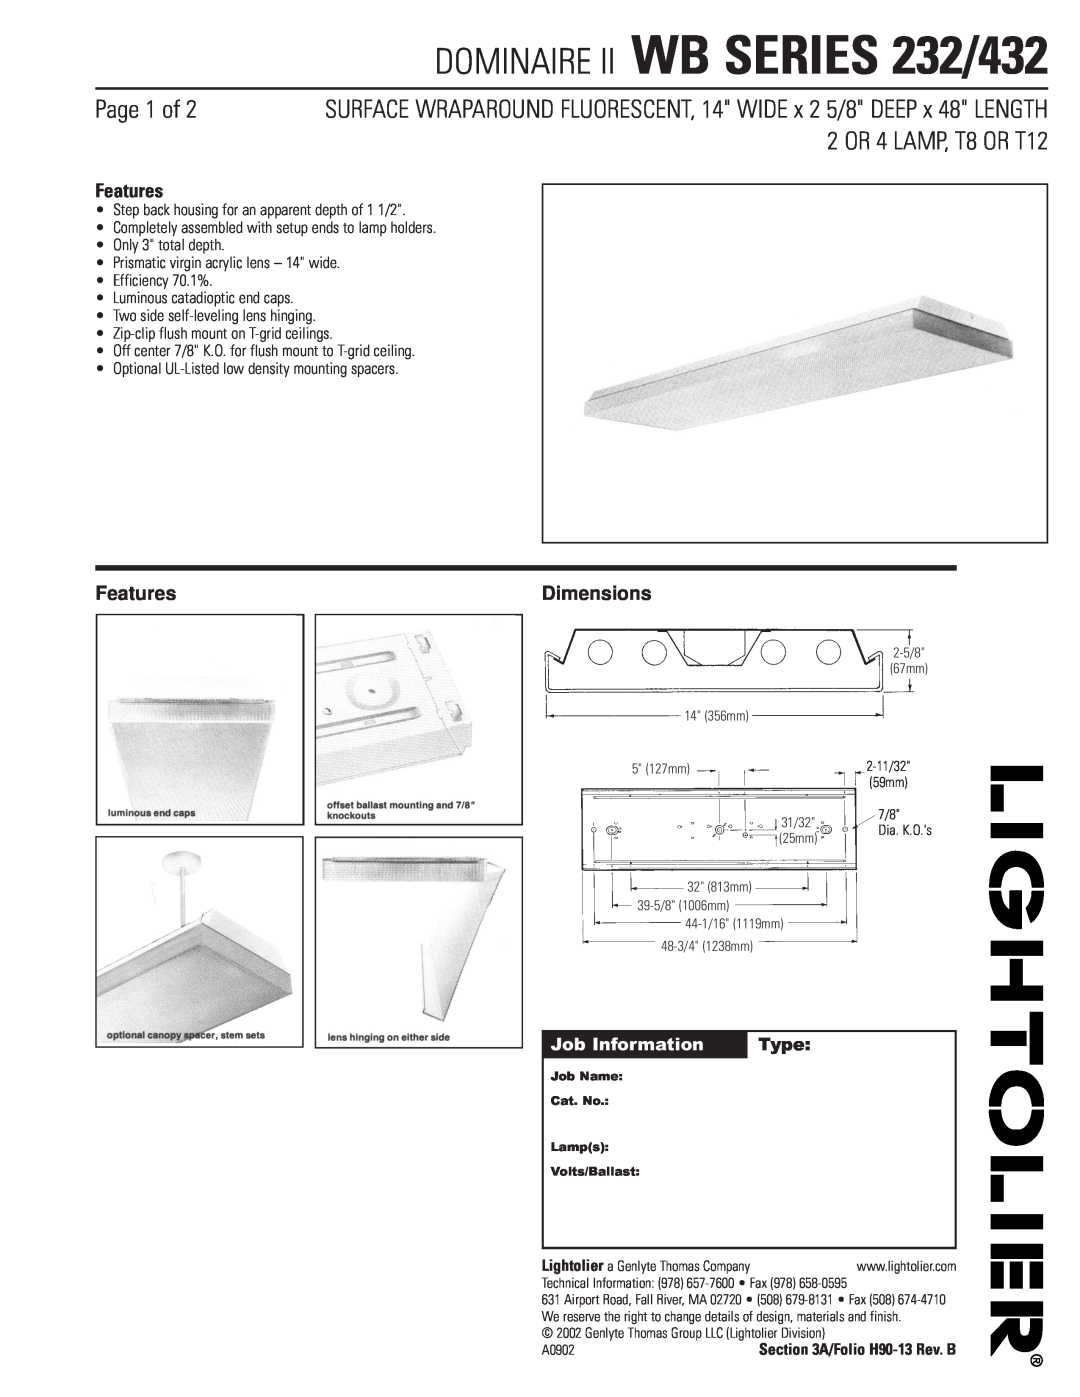 Lightolier WB SERIES 432 dimensions DOMINAIRE II WB SERIES 232/432, Page 1 of, 2 OR 4 LAMP, T8 OR T12, Features, Type 